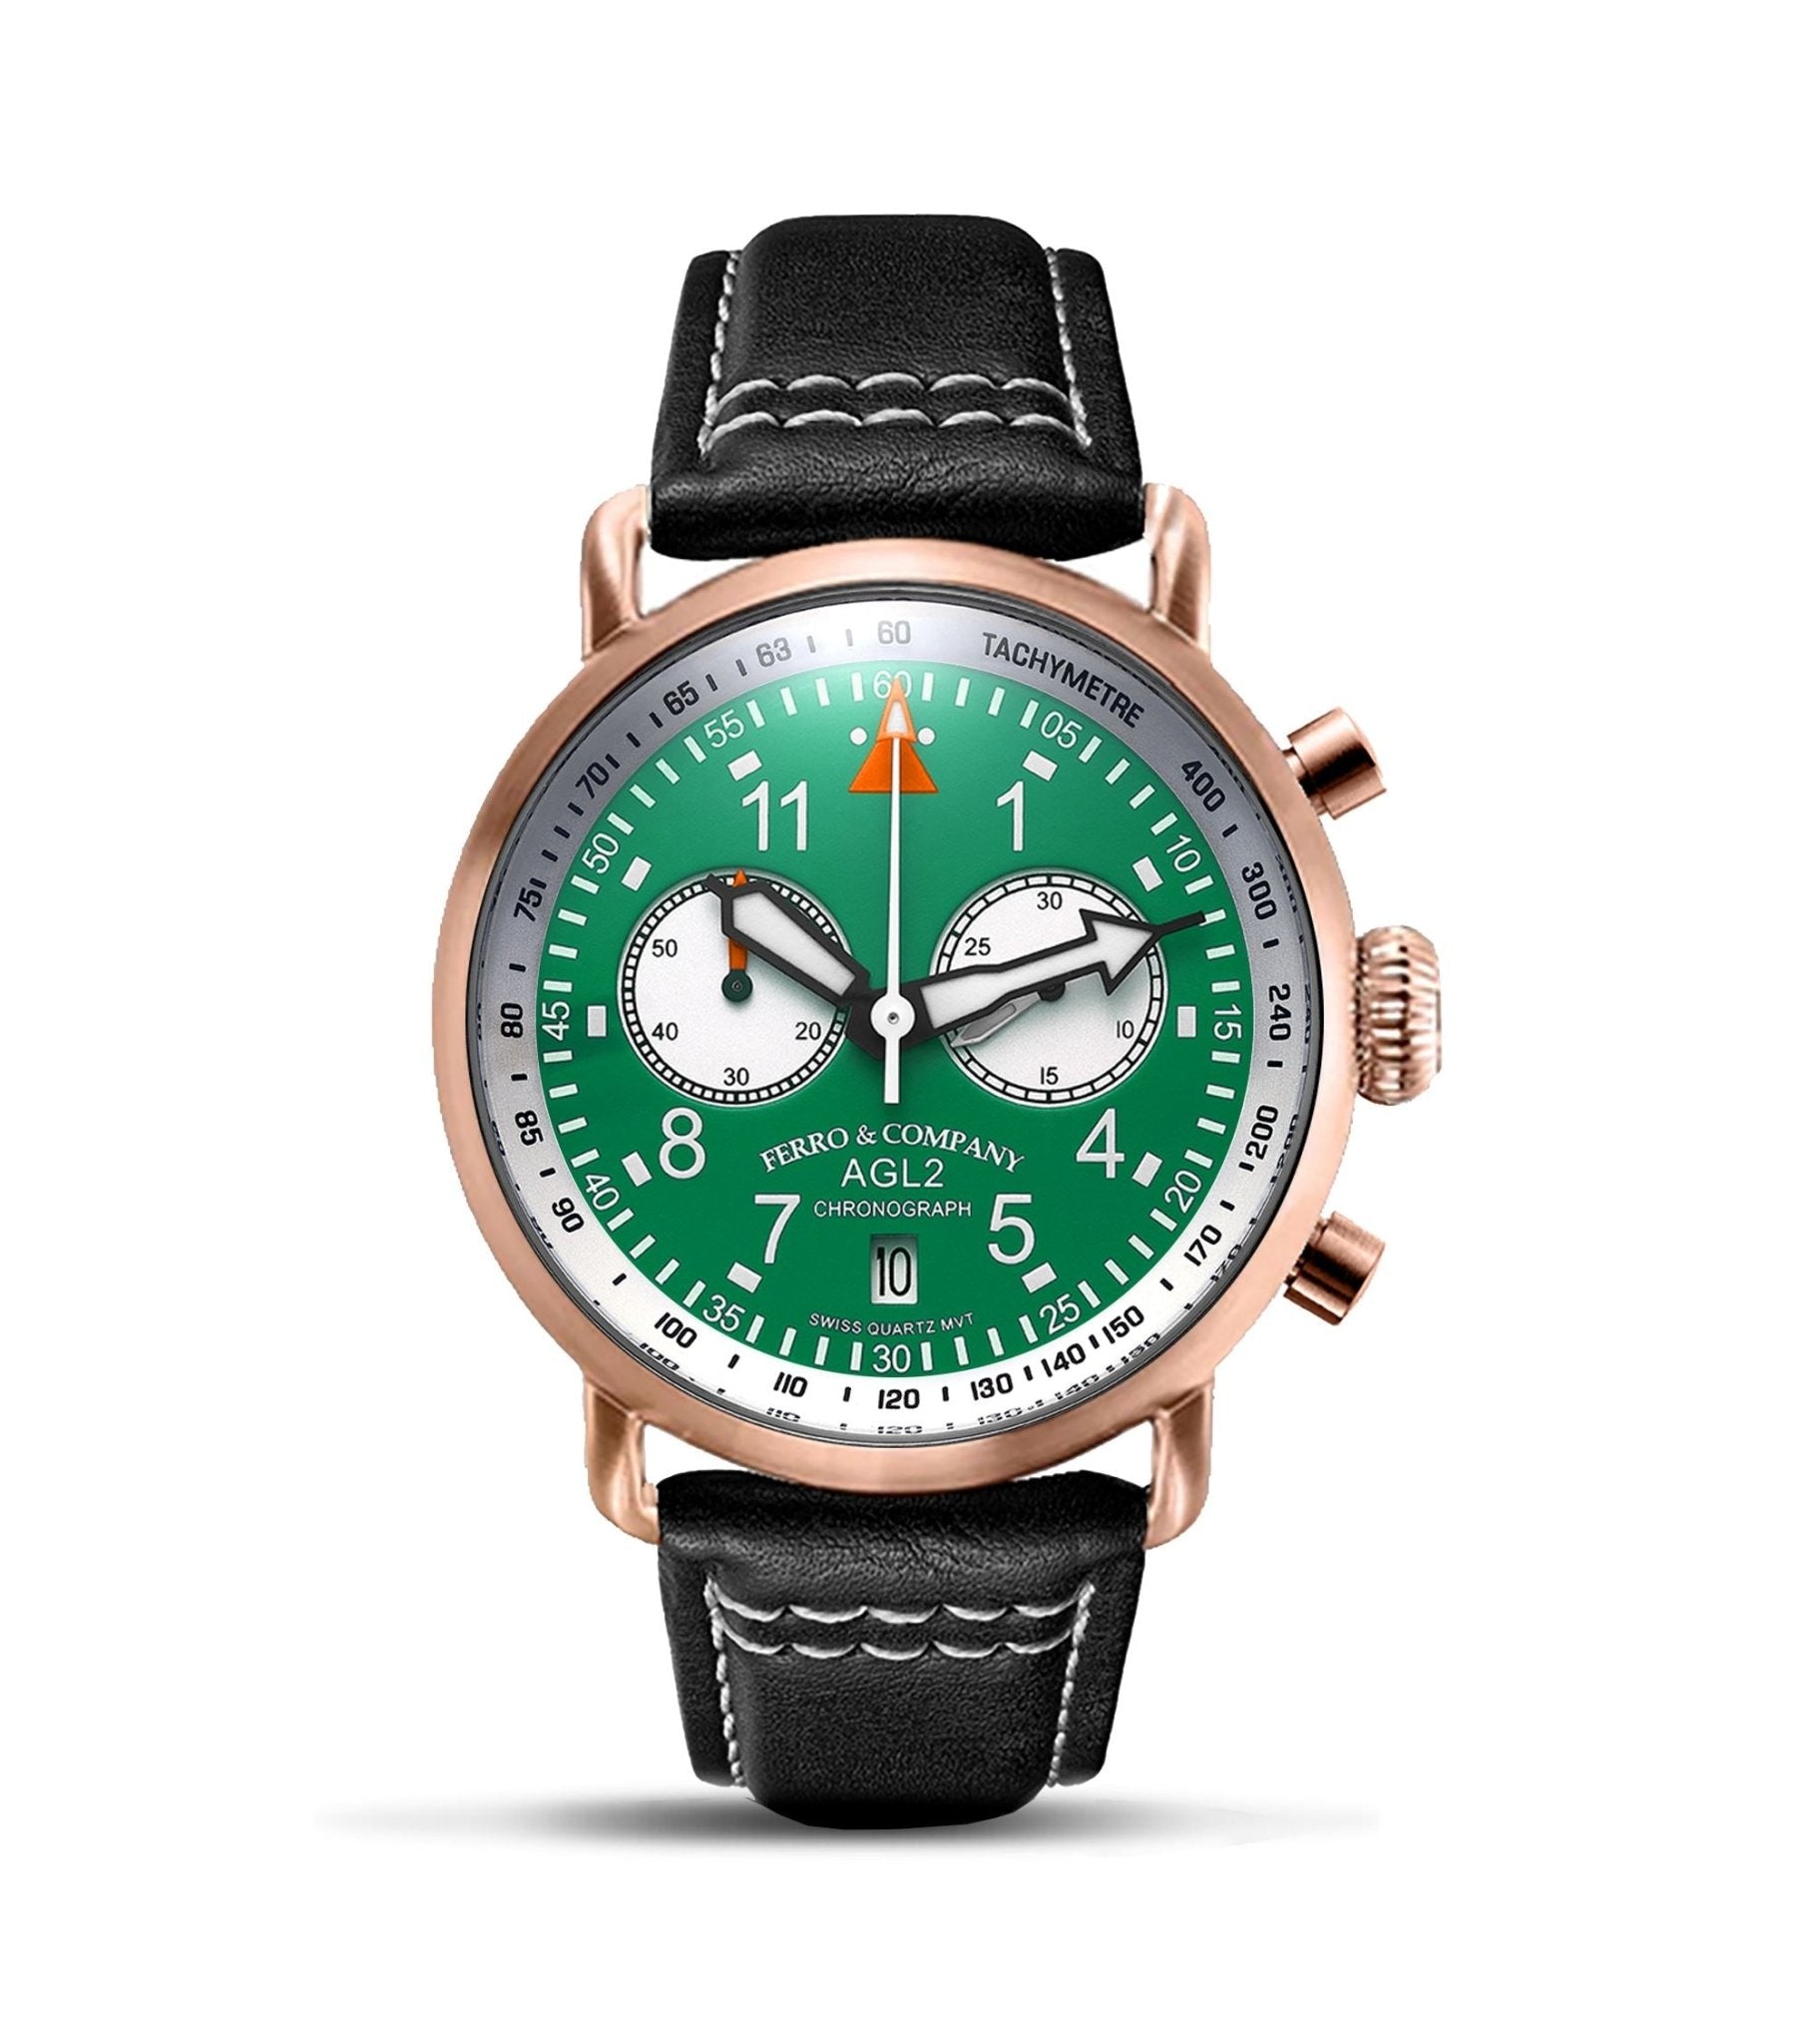 Ferro Watches AGL 2 Vintage style Pilot Watch Chronograph Green Rose Gold - Ferro &amp; Company Watches